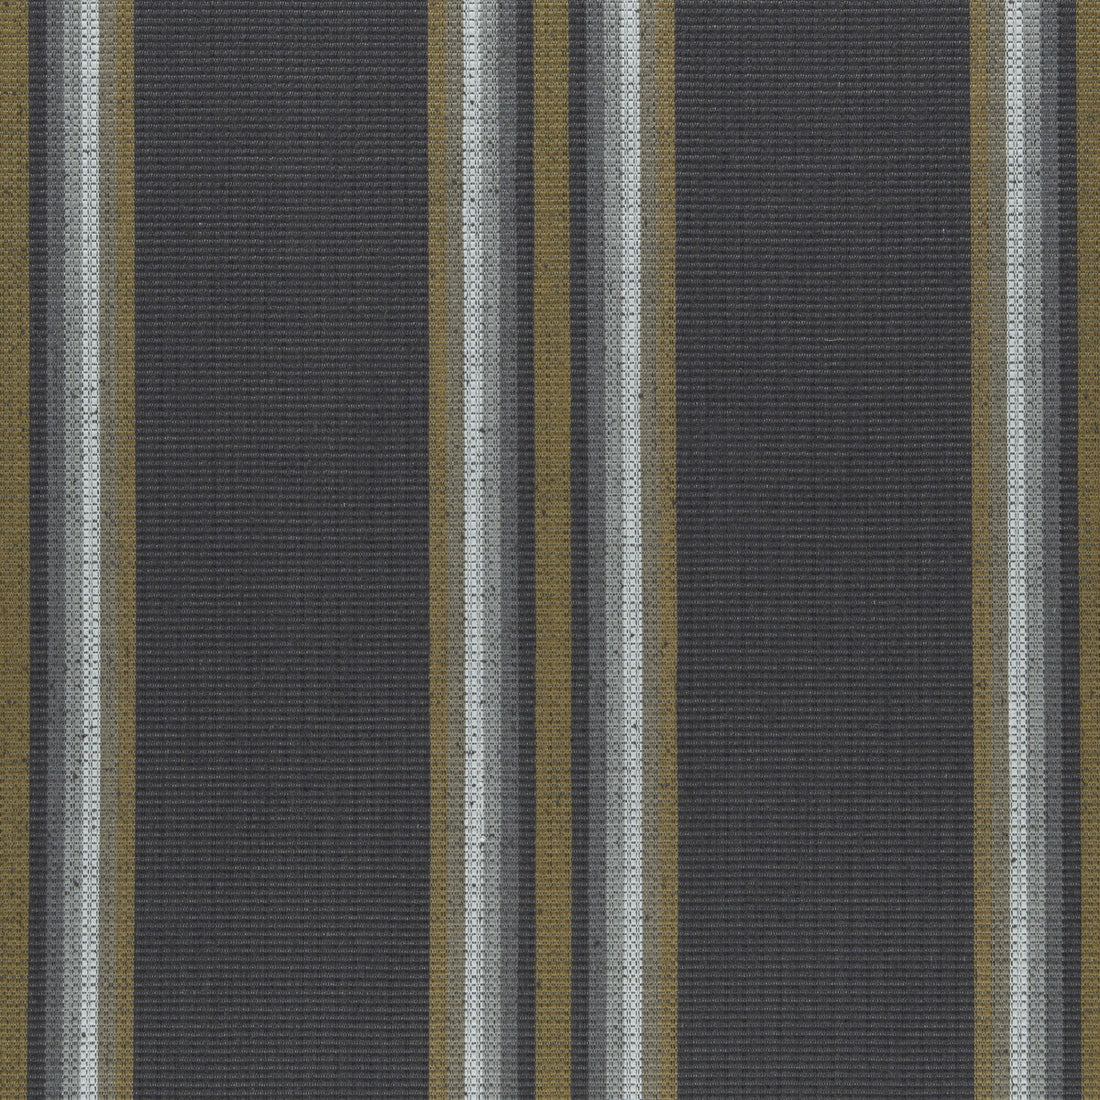 Imani fabric in charcoal/cinnamon color - pattern F0955/01.CAC.0 - by Clarke And Clarke in the Clarke &amp; Clarke Amara collection